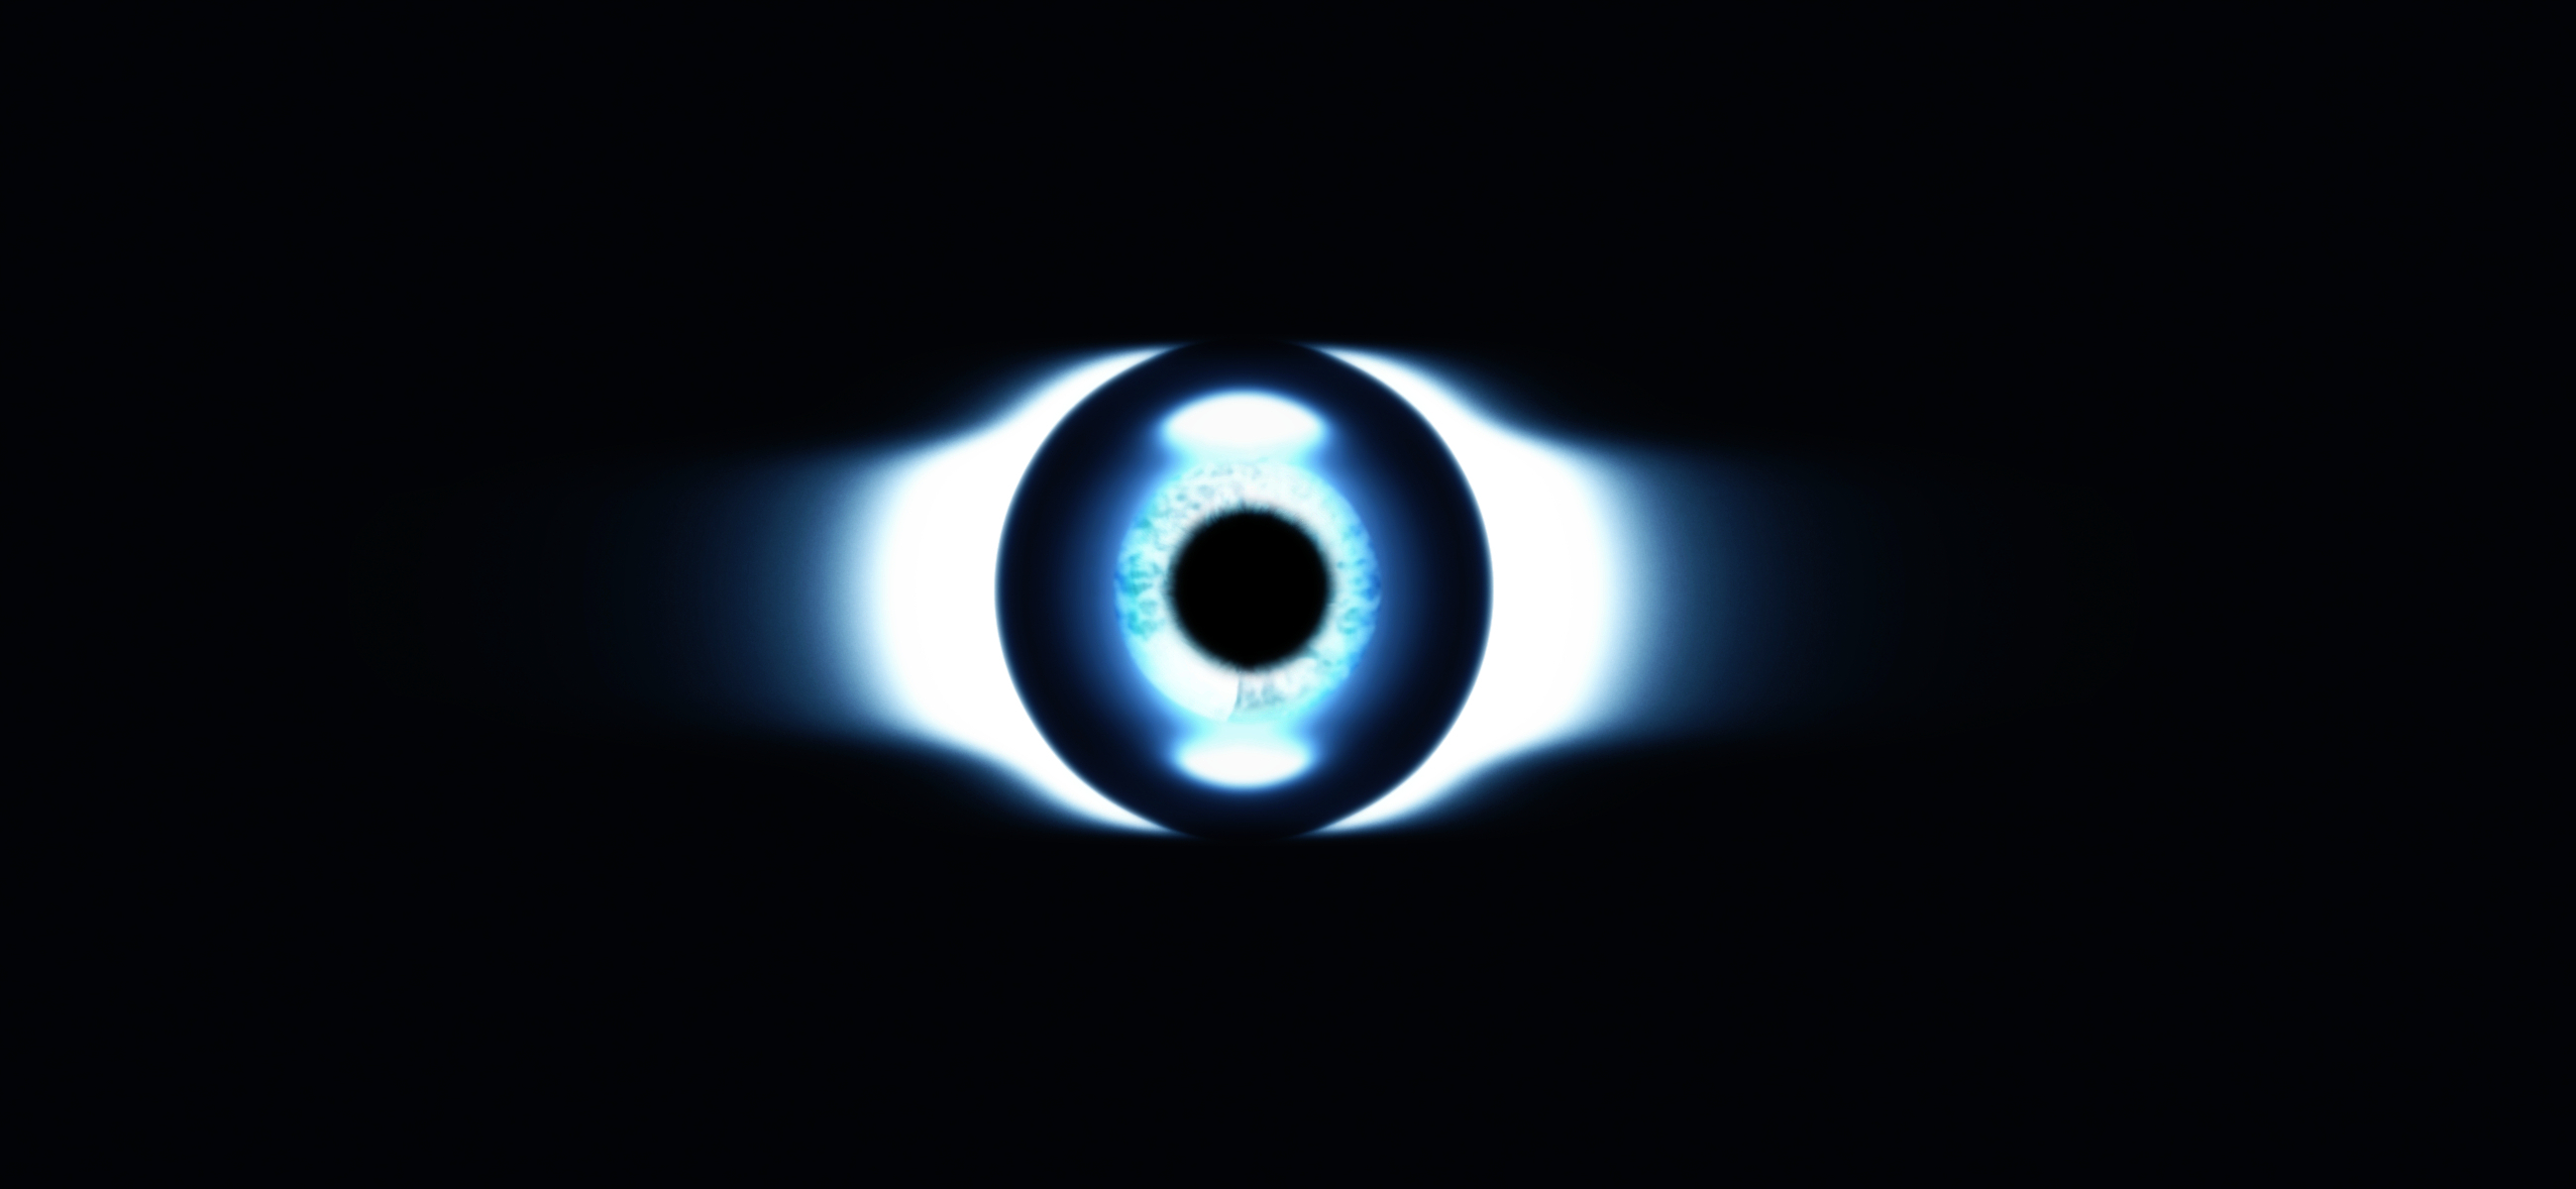 195 Eye HD Wallpapers | Backgrounds - Wallpaper Abyss - Page 3